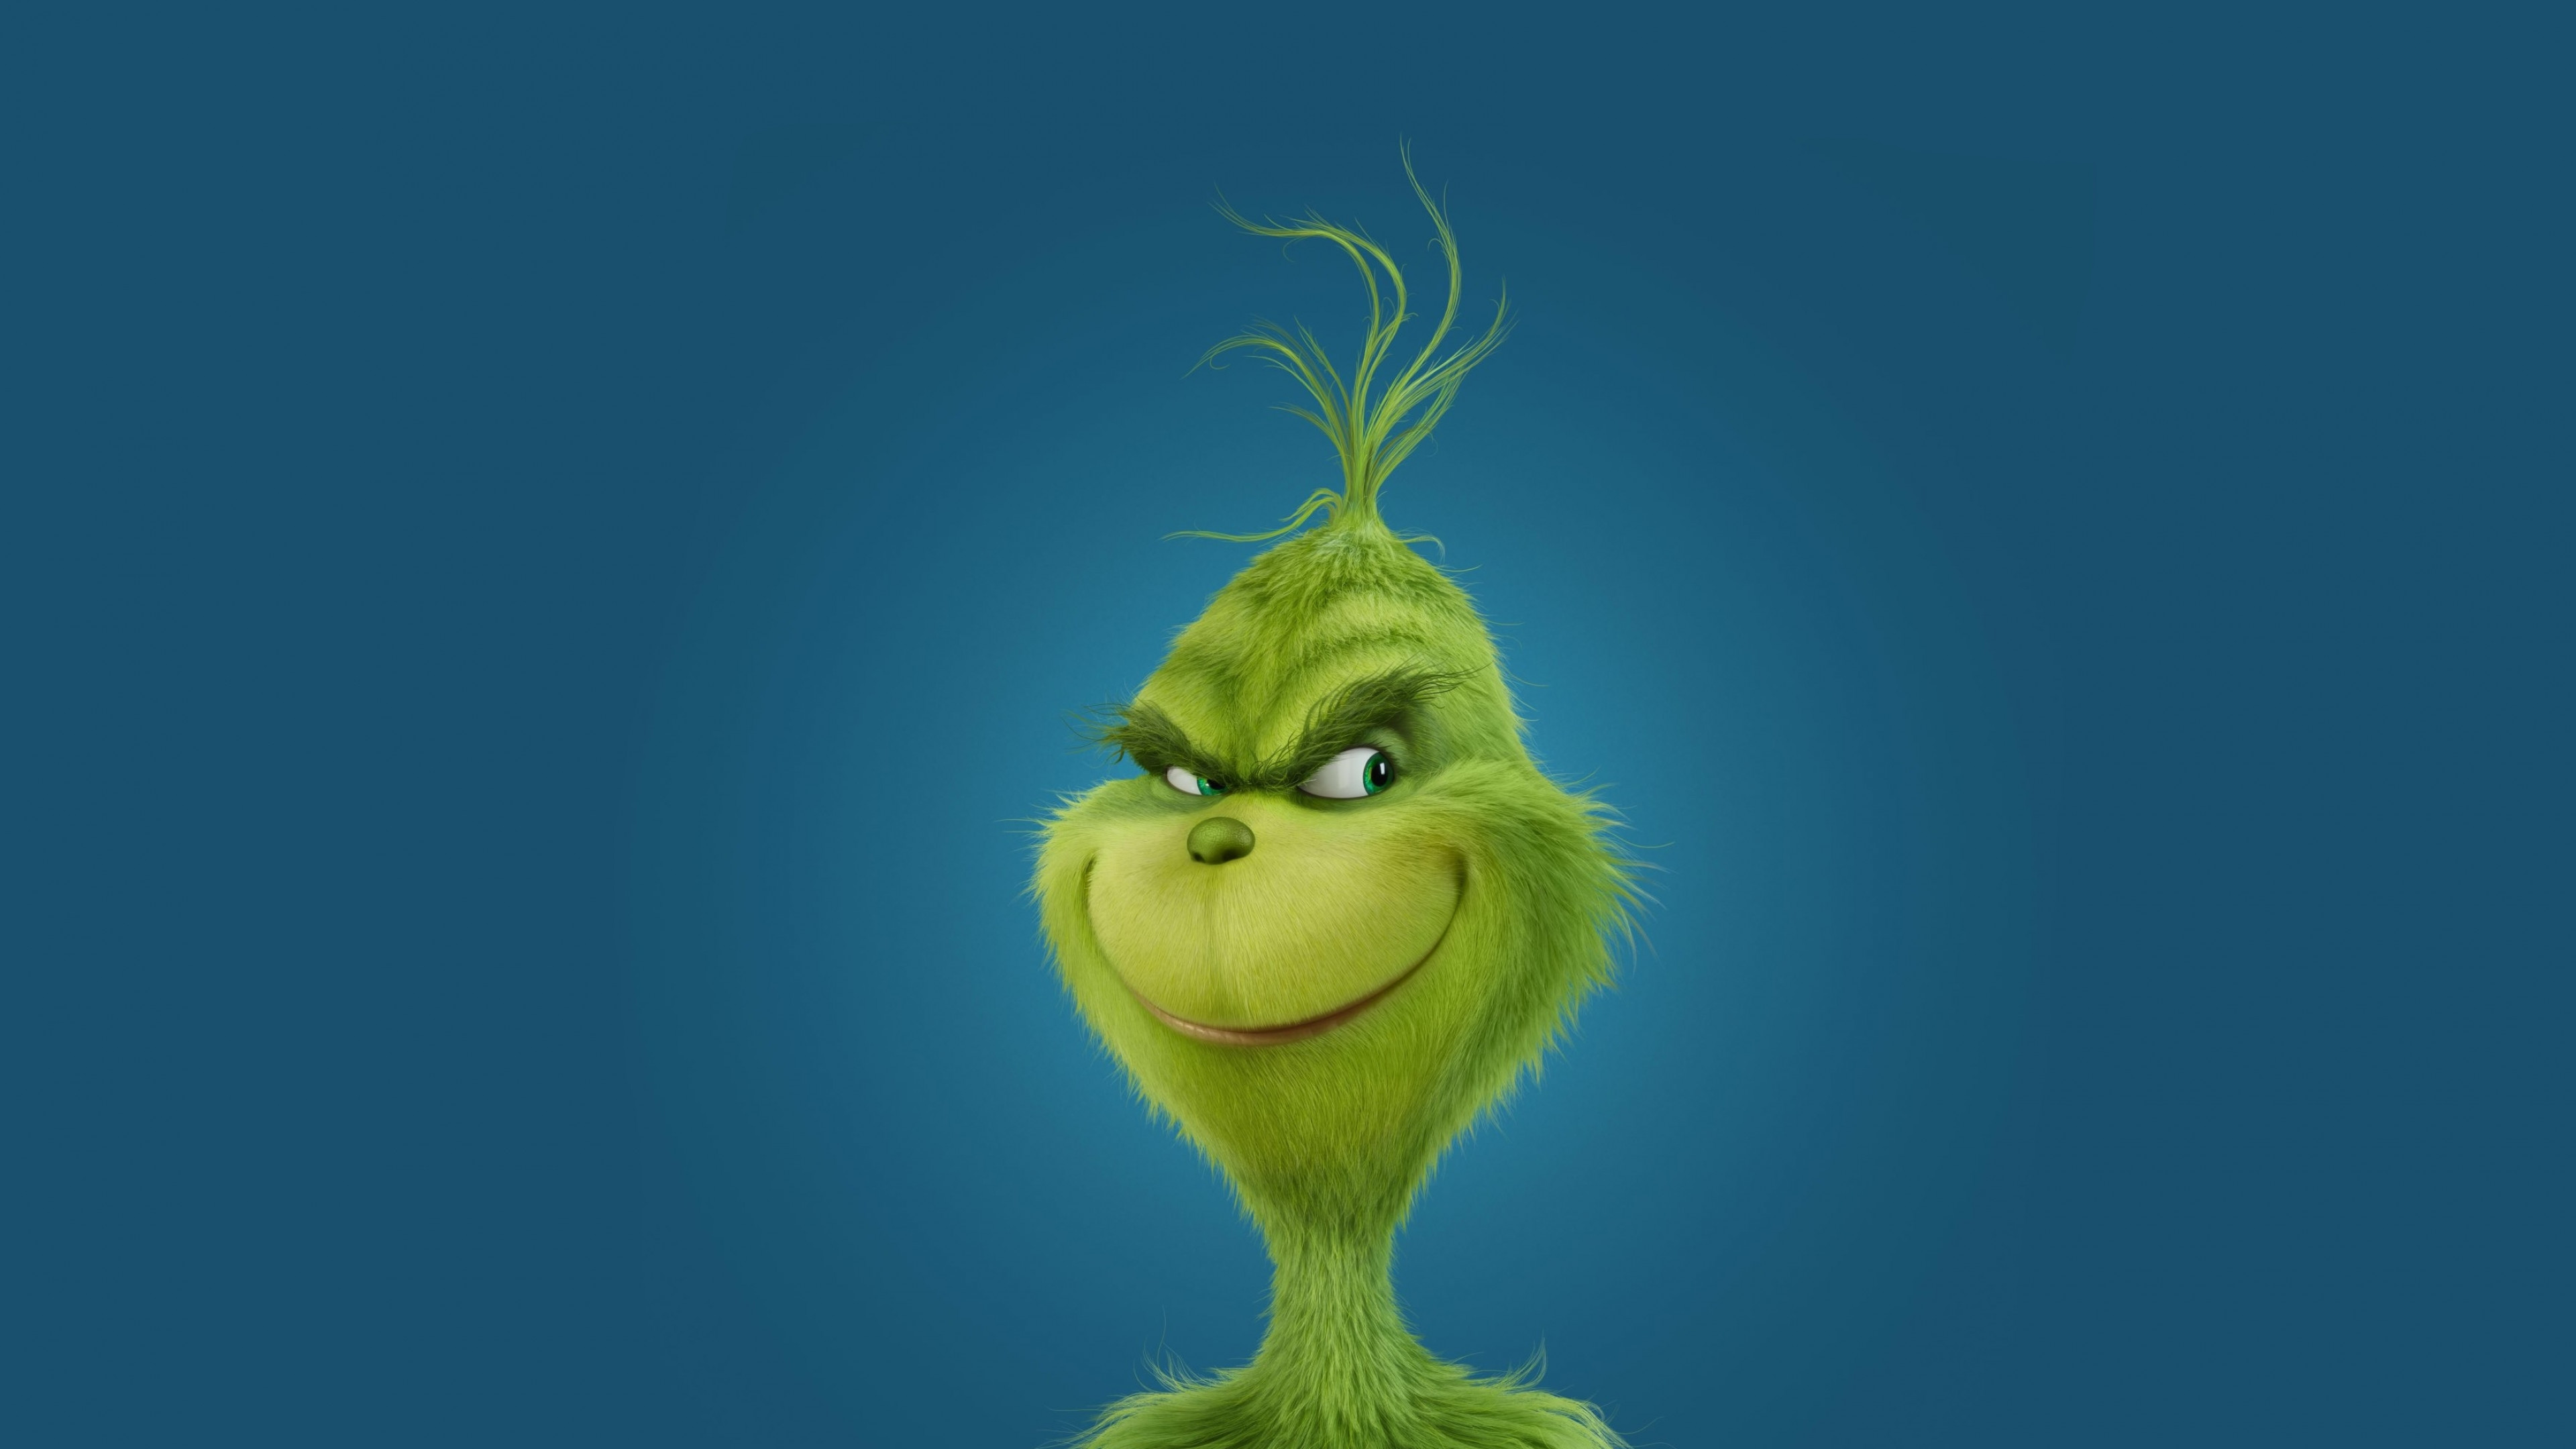 Wallpaper How the Grinch Stole Christmas, Grinch, green, Movies #10336